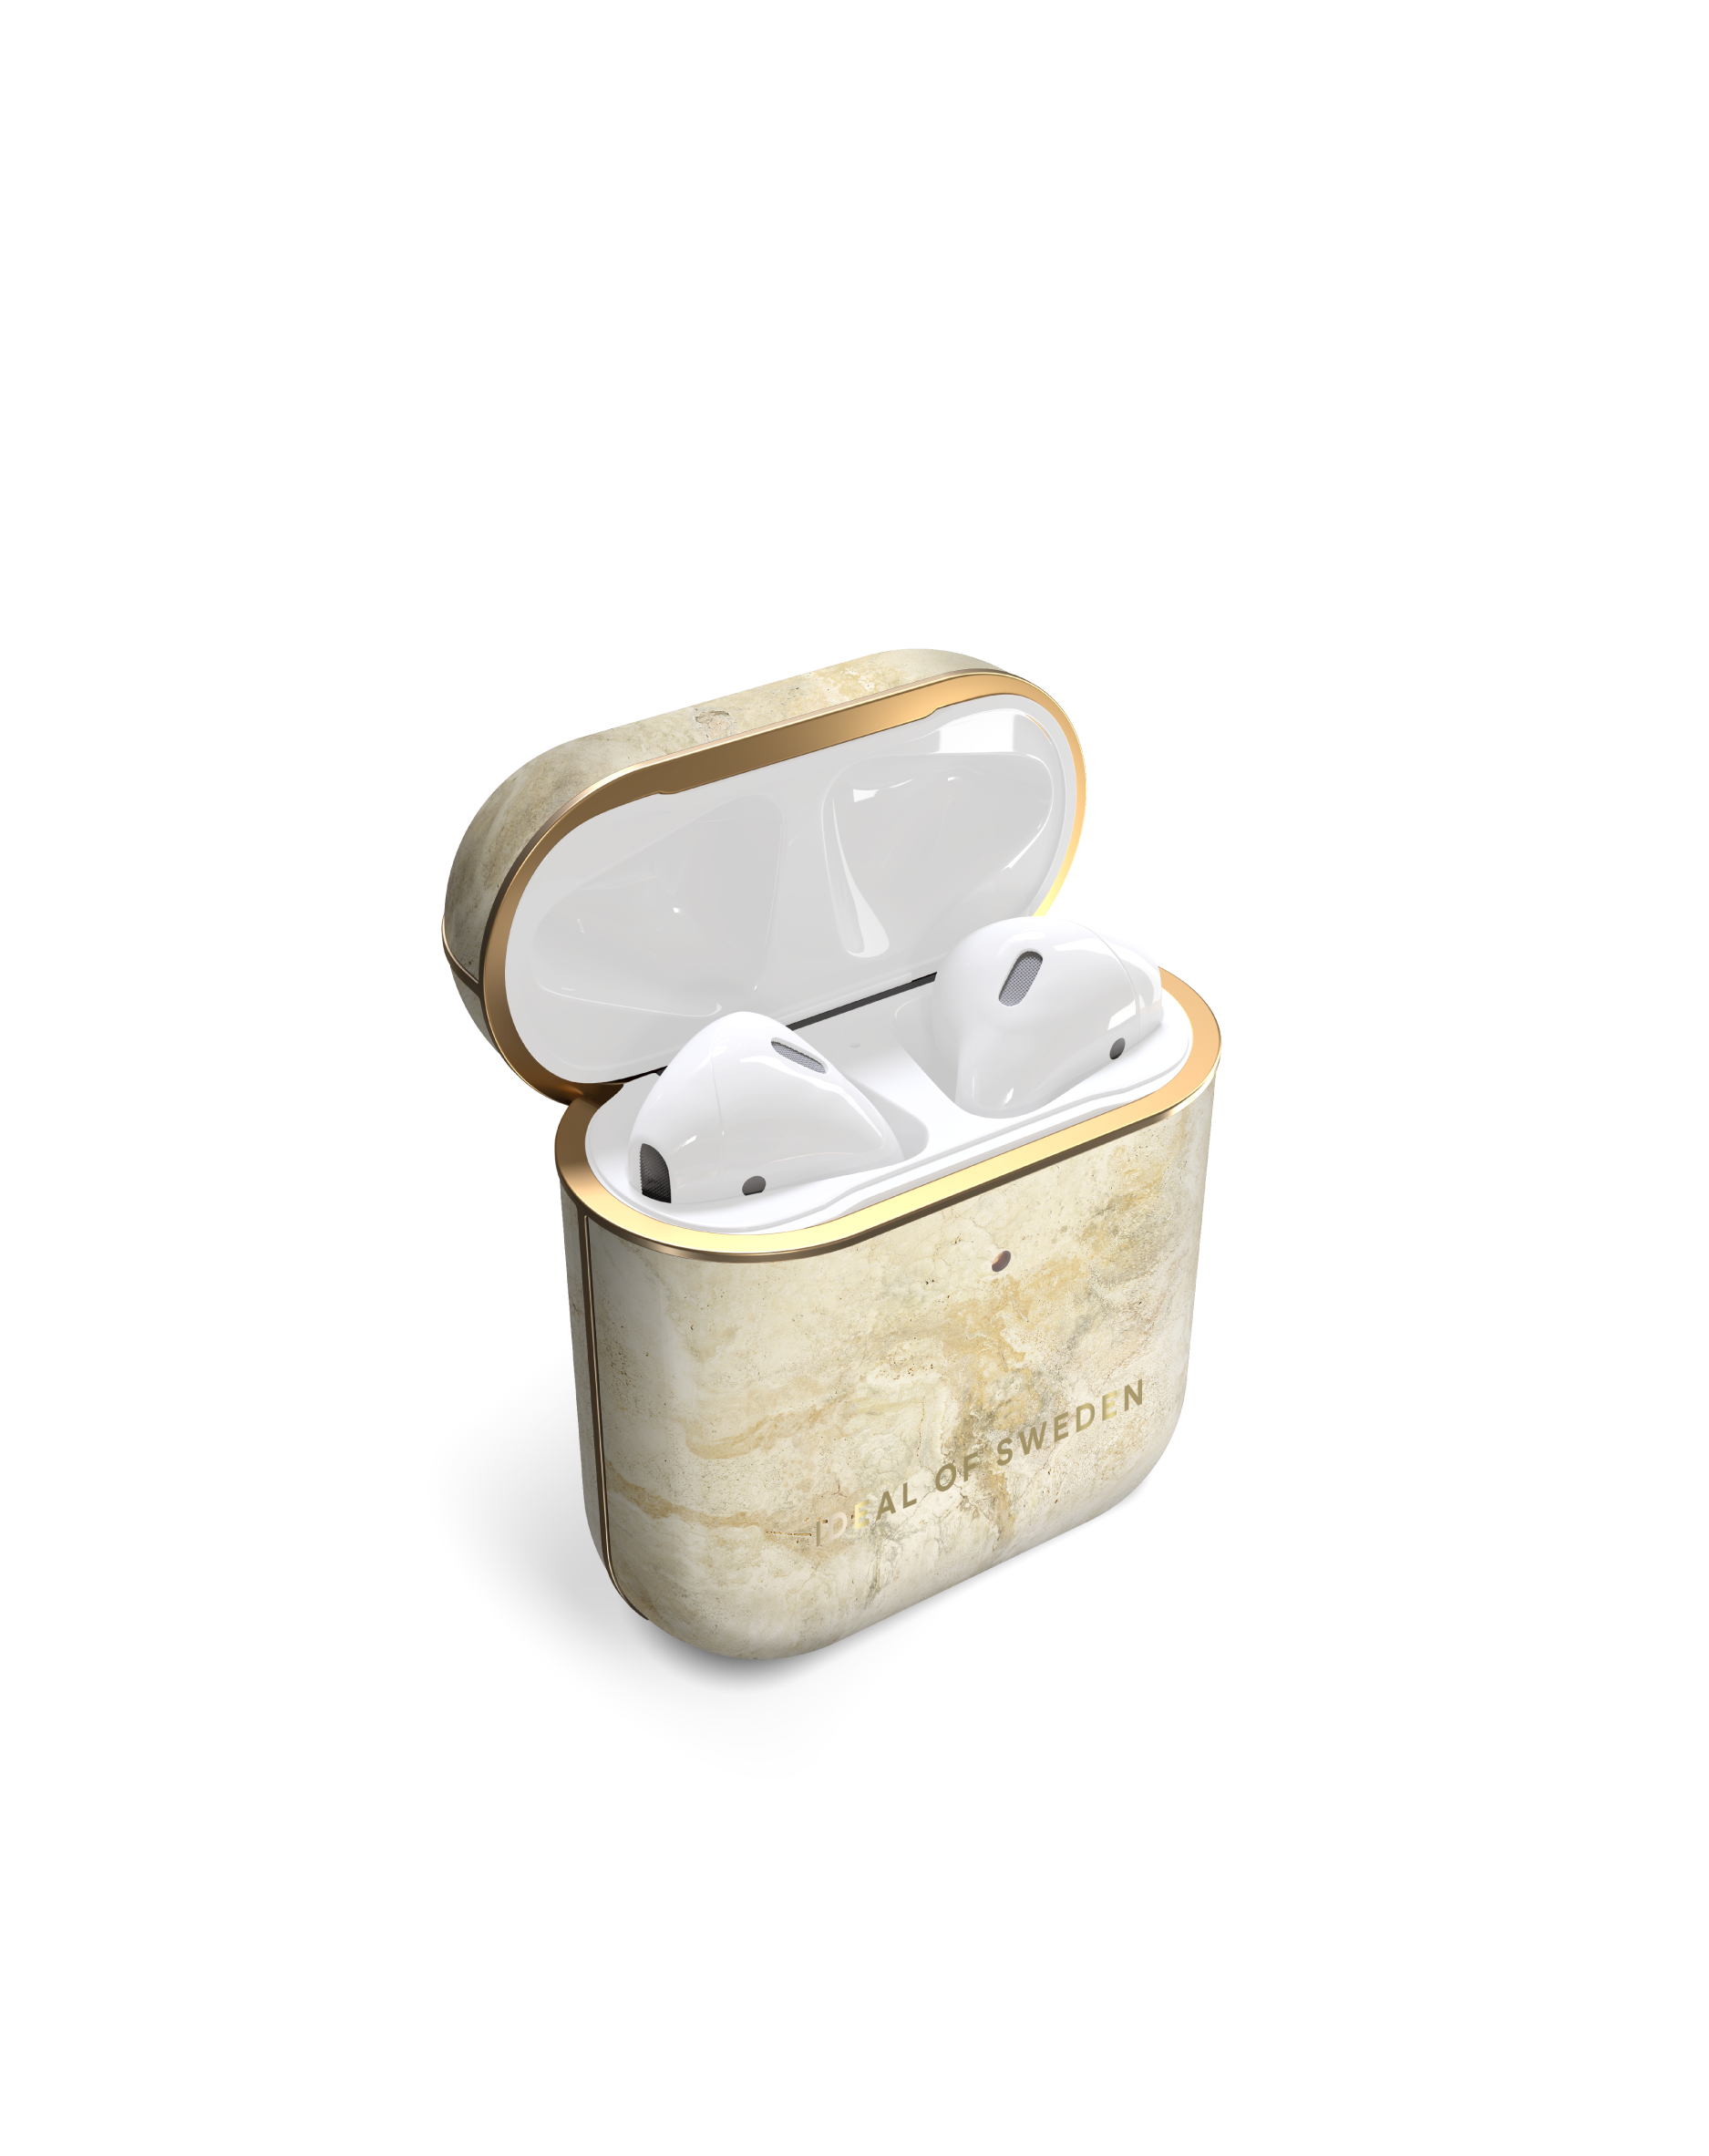 IDEAL OF SWEDEN für: Cover Apple passend AirPod Marble Full Case IDFAPC-195 Sandstorm